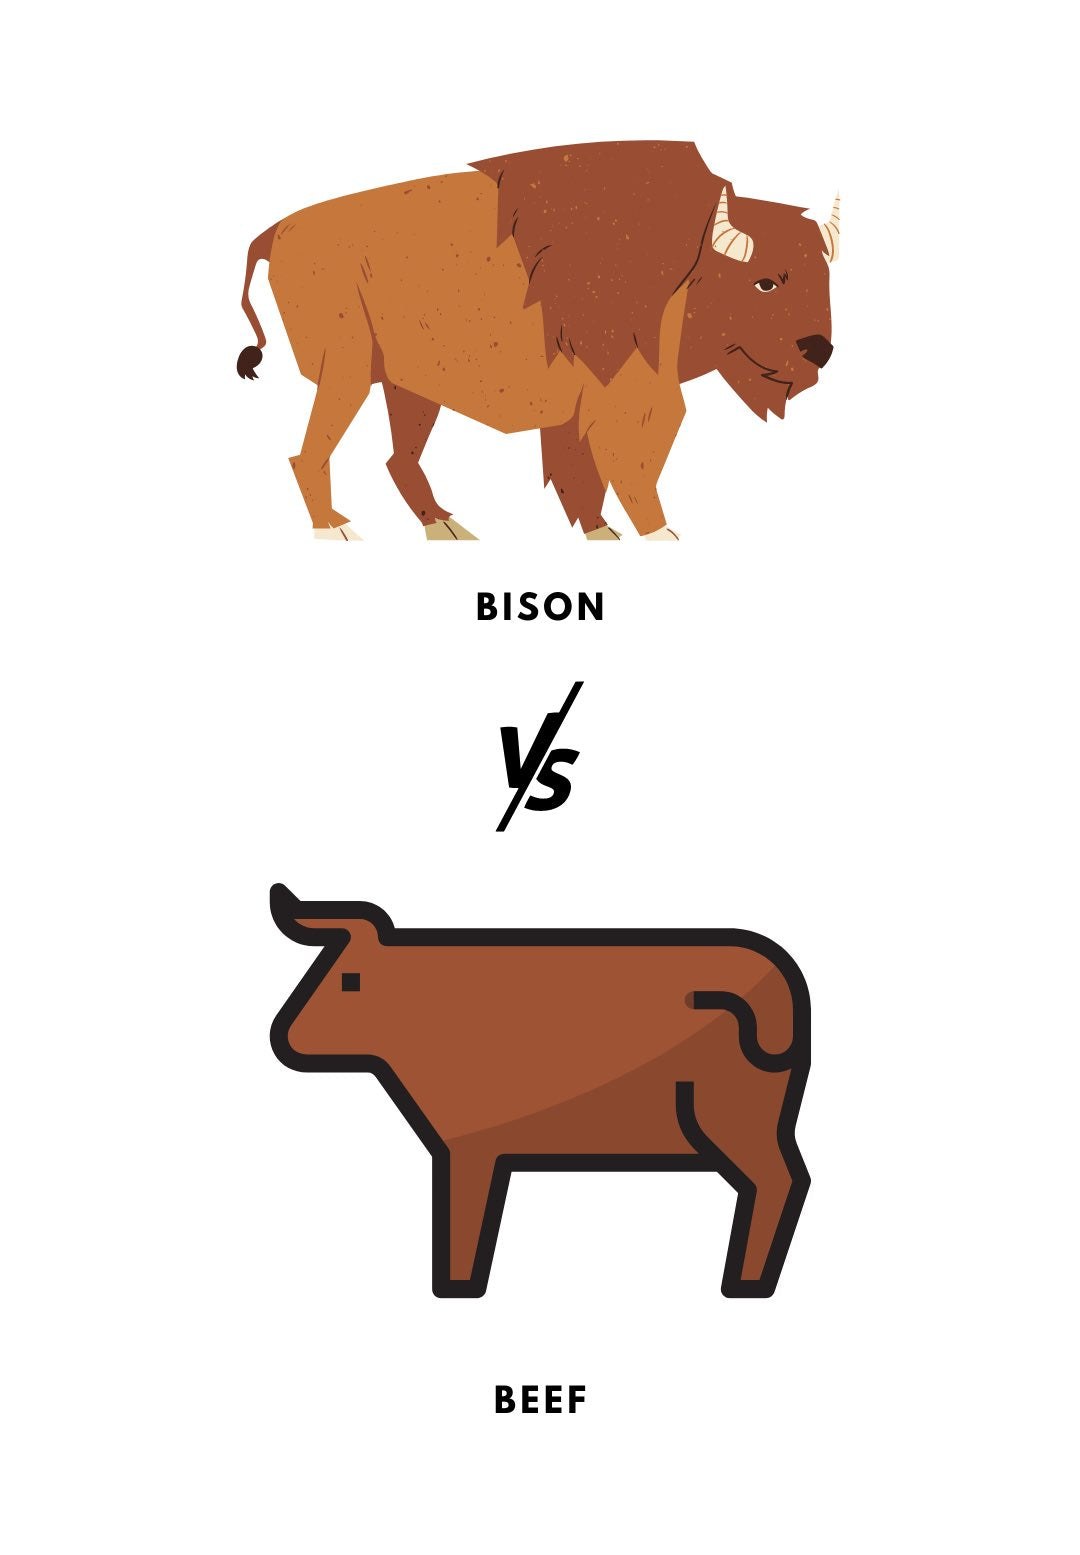 Difference between Bison and Beef